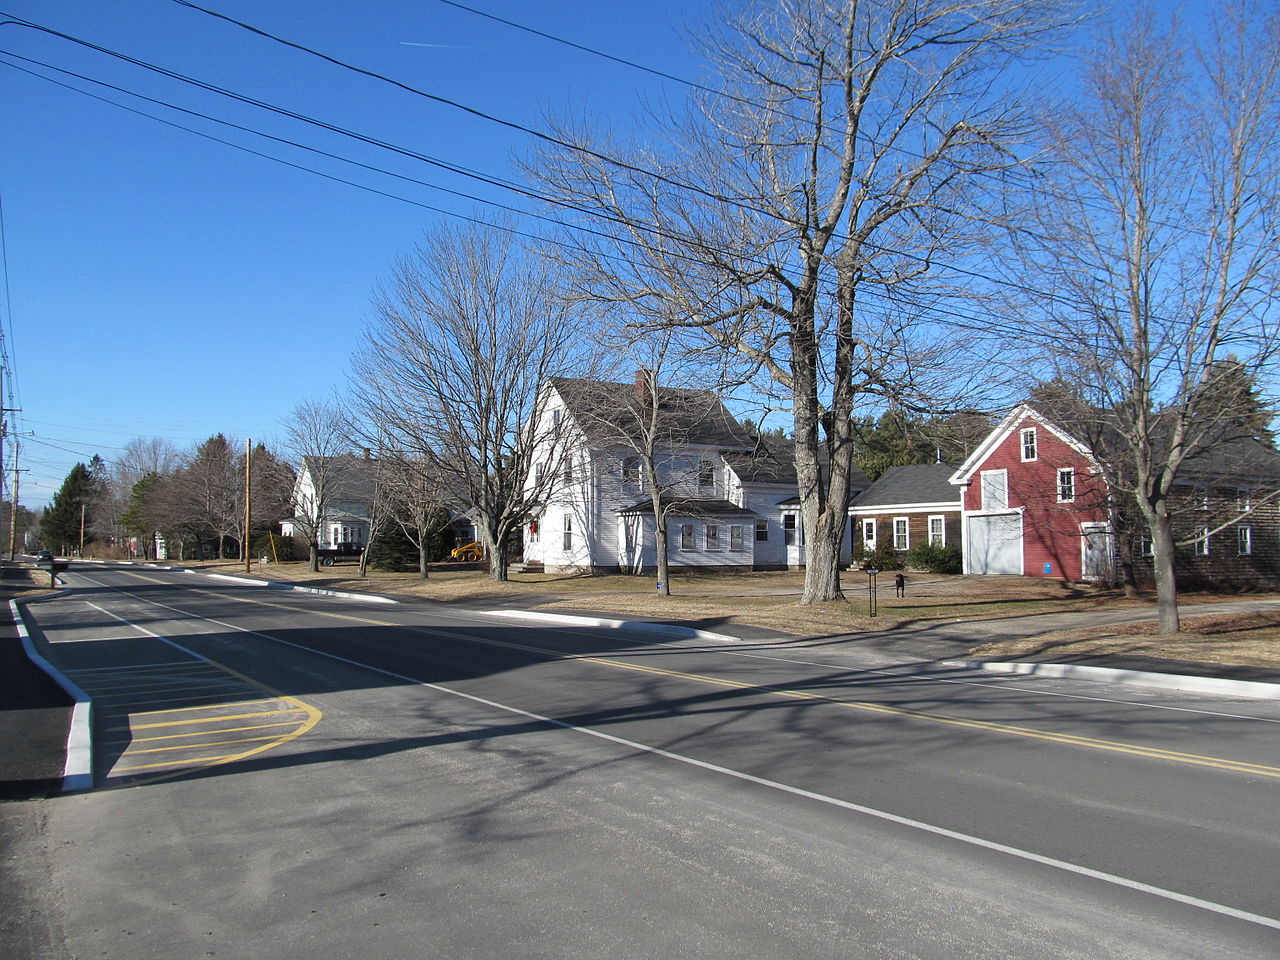 Haus and Hues in West Kennebunk